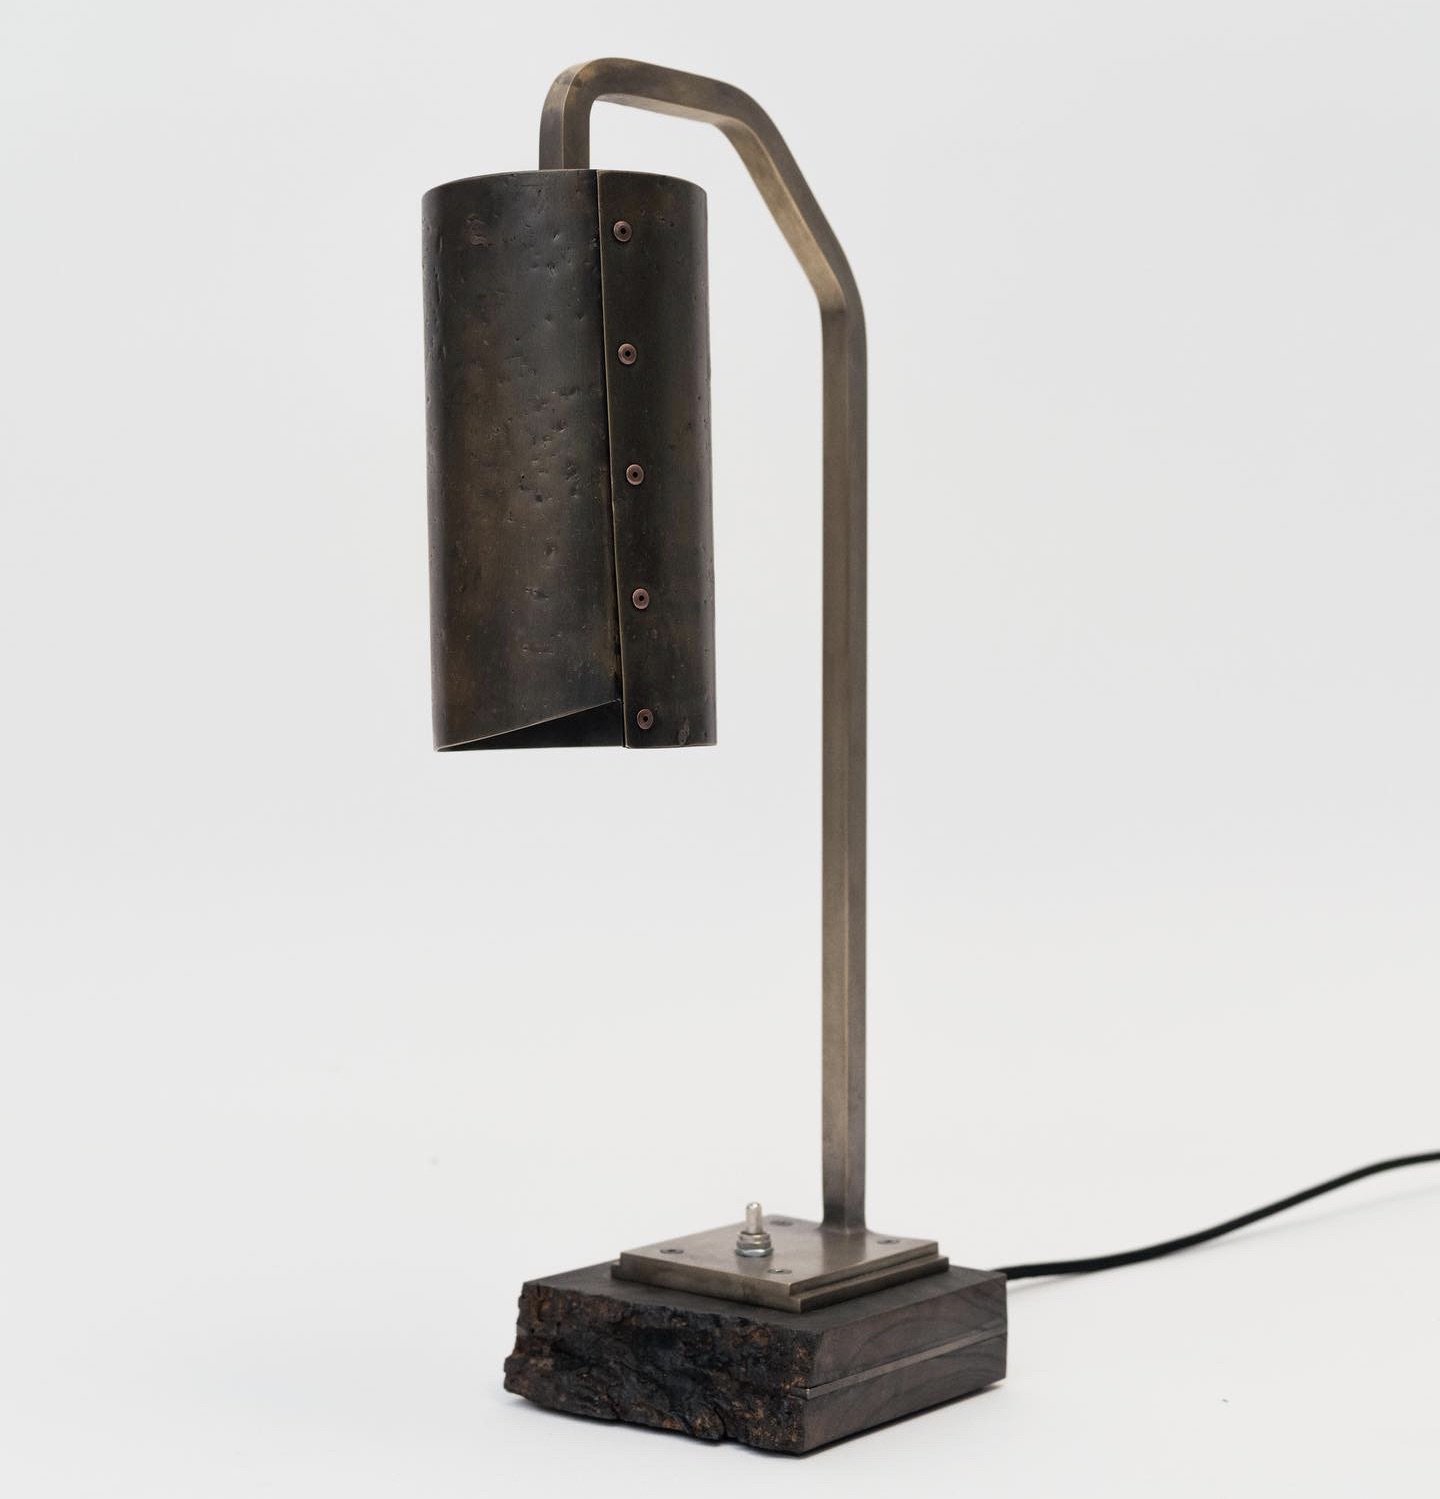 A View Of A Handmade Metal Elio Table Lamp